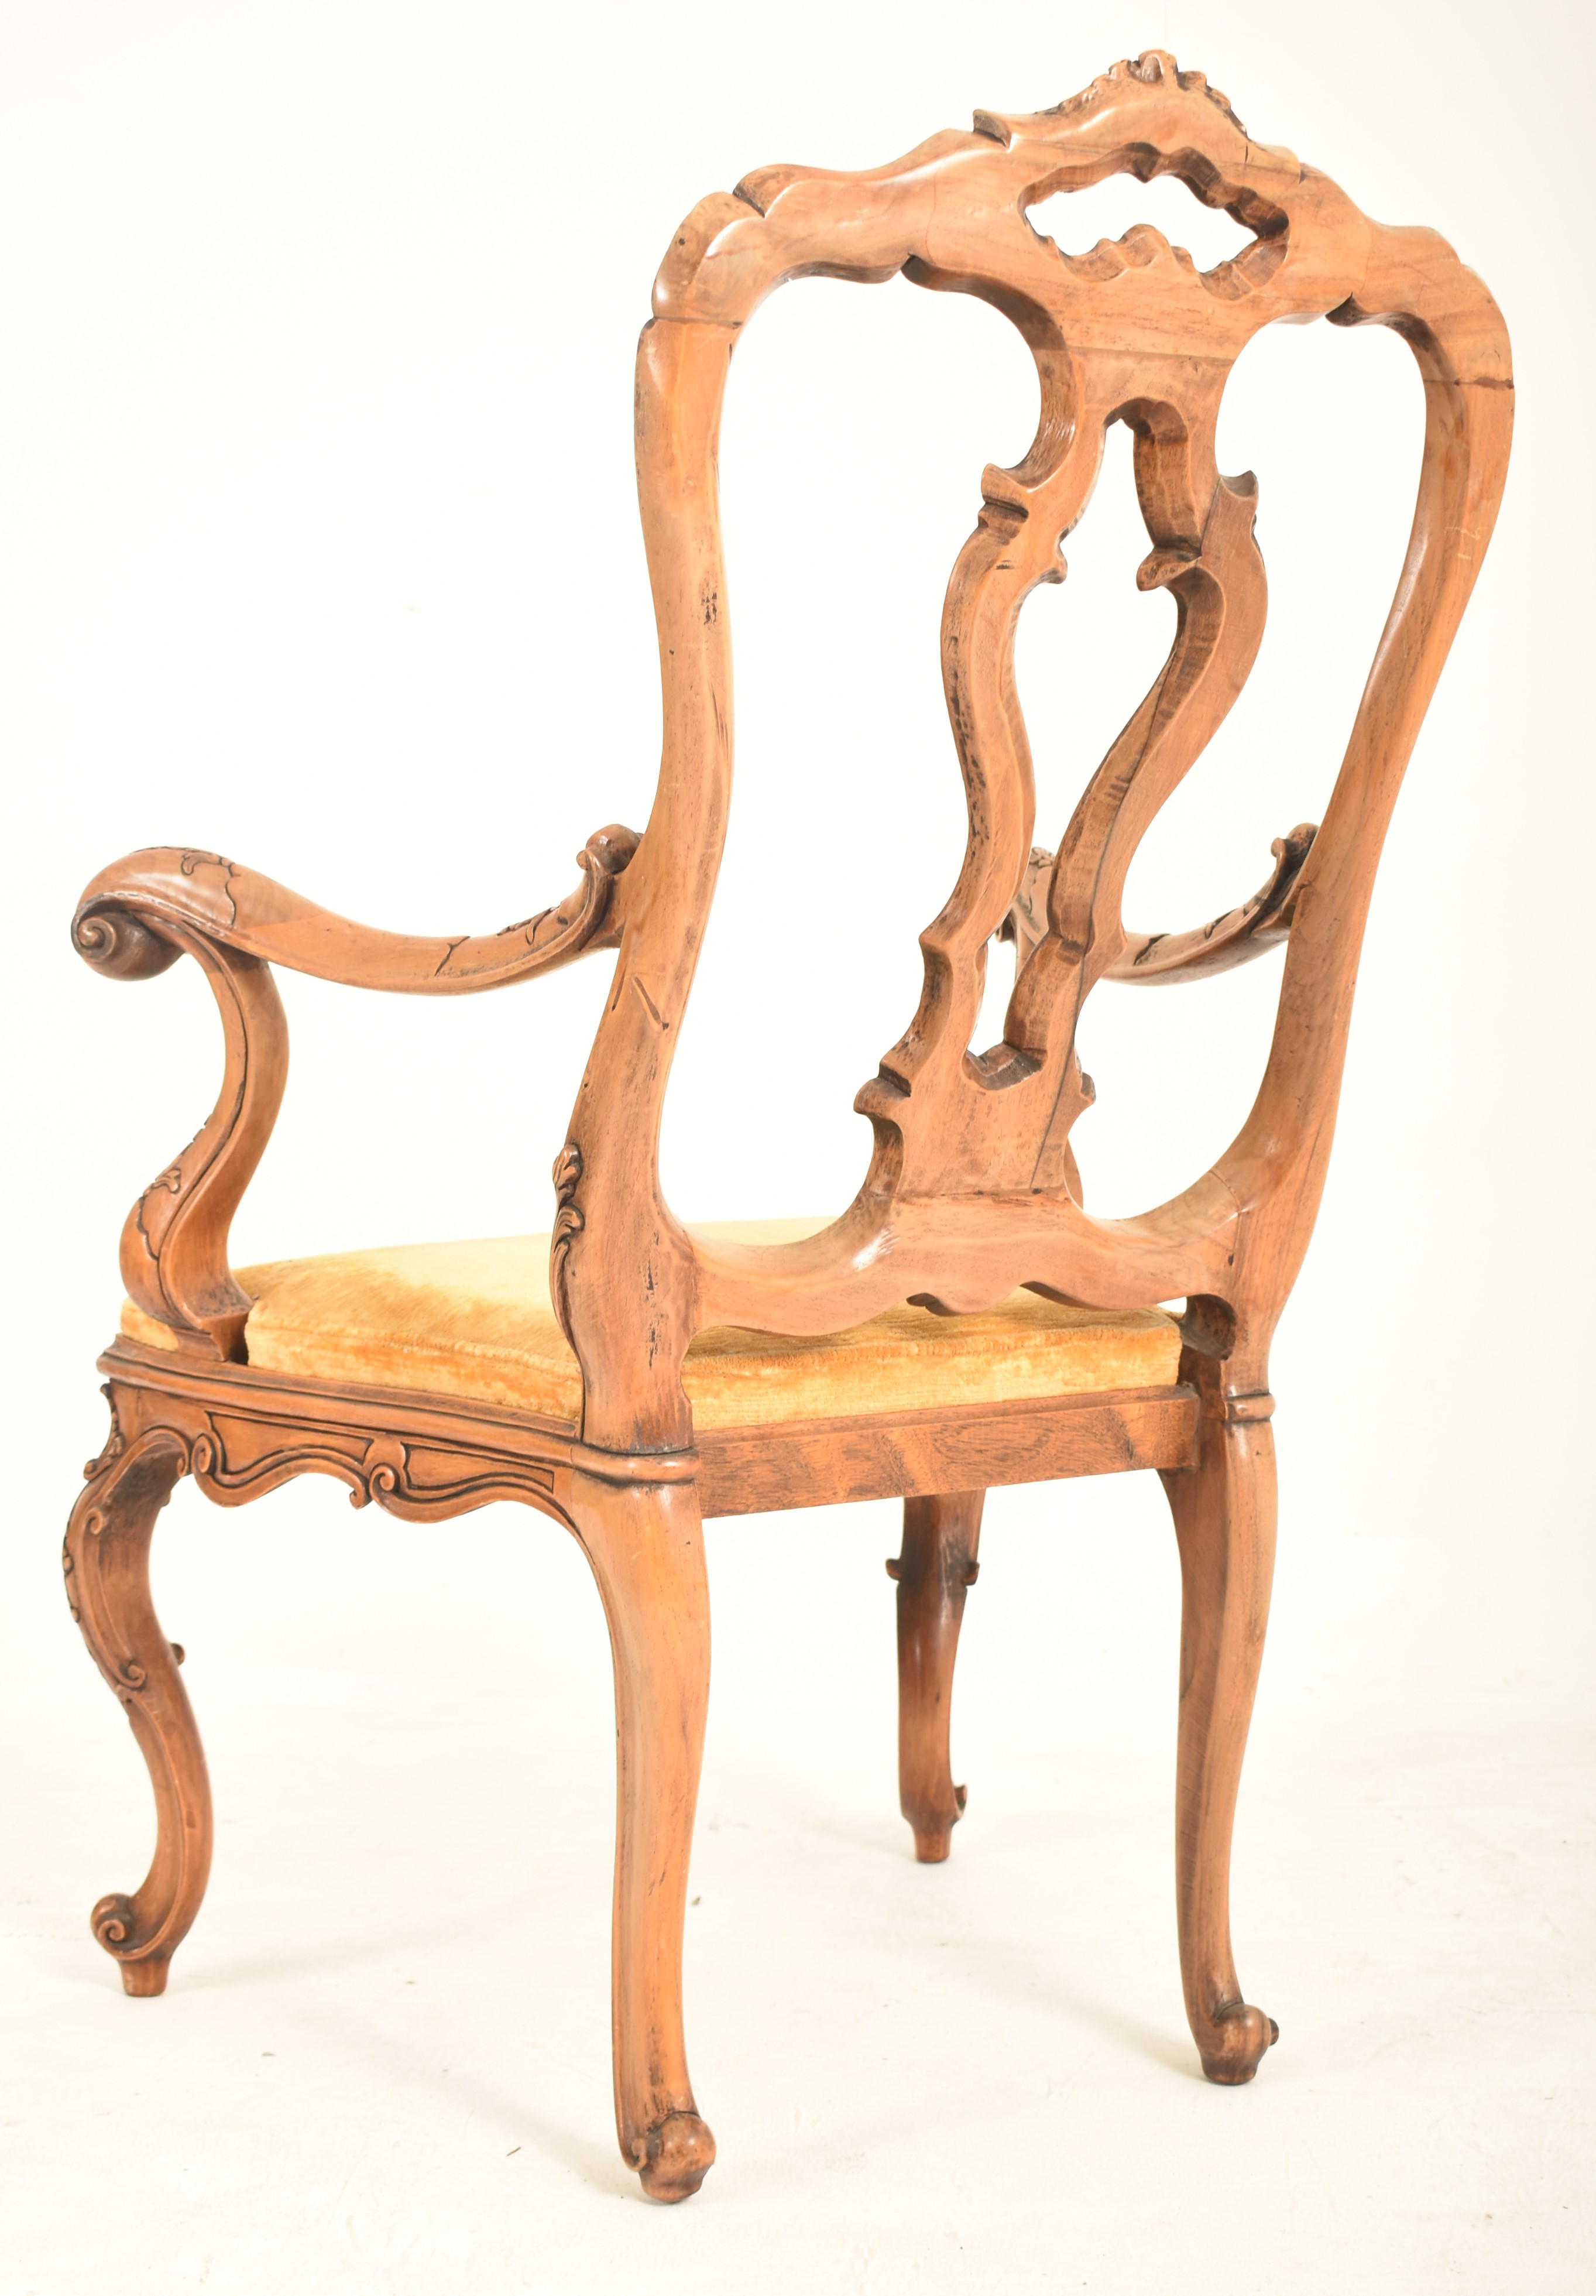 VENETIAN 18TH CENTURY STYLE CARVED WALNUT ARMCHAIR - Image 5 of 5